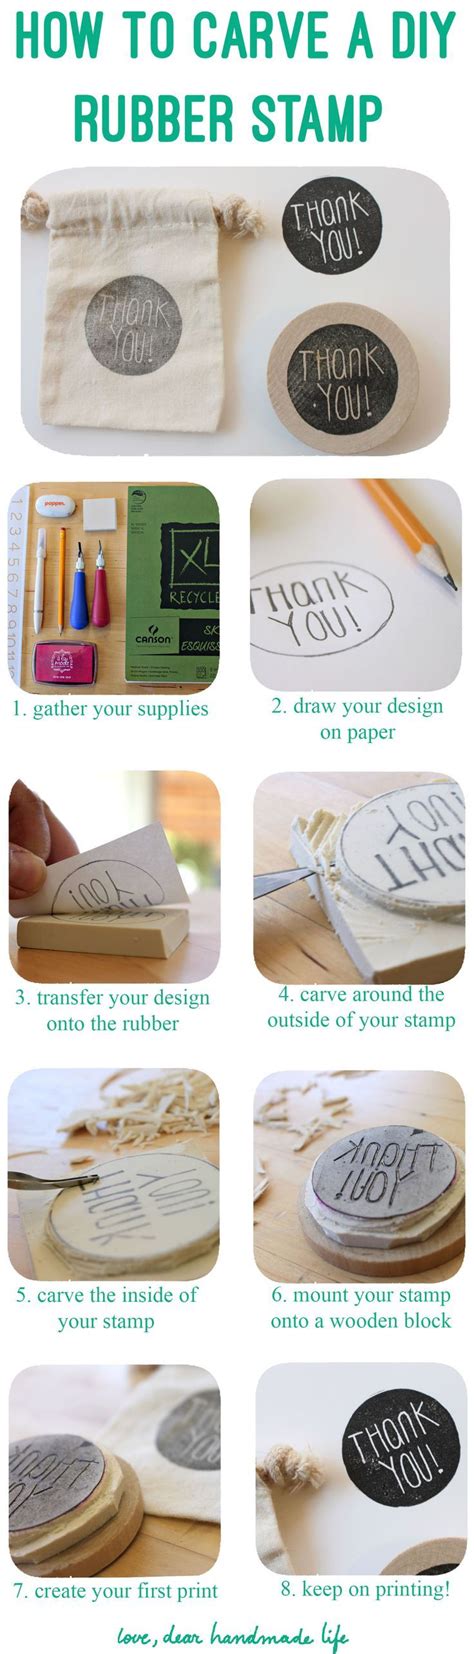 Diy Rubber Stamp Making How To Make A Diy Carved Rubber Stamp Dear